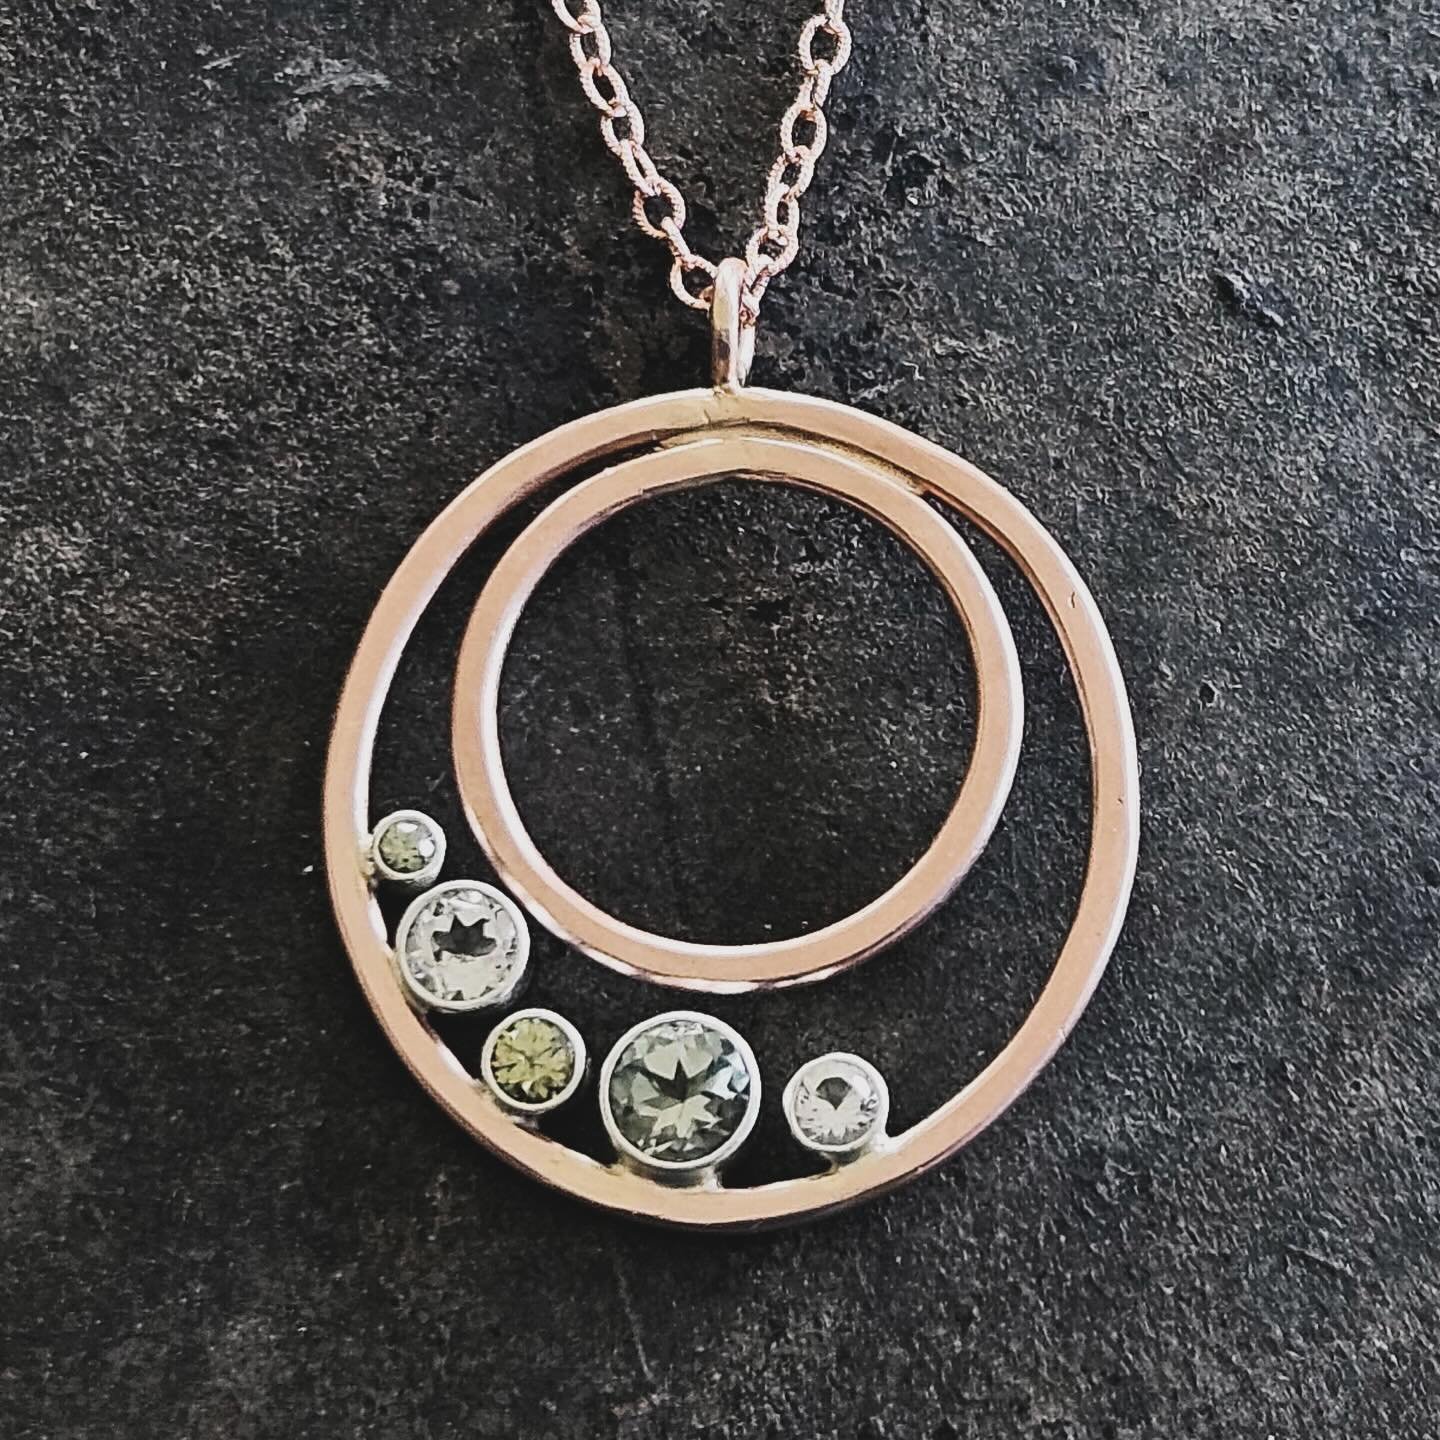 We&rsquo;ve got a special evening lined up for you on Friday 3 May from 5.30pm - as we will be launching new pop up guest @amy_bixby_jewellery 

Come along and meet Amy, and view her stunning range popping up with us for May. 

Bixby Jewellery.

Amy 